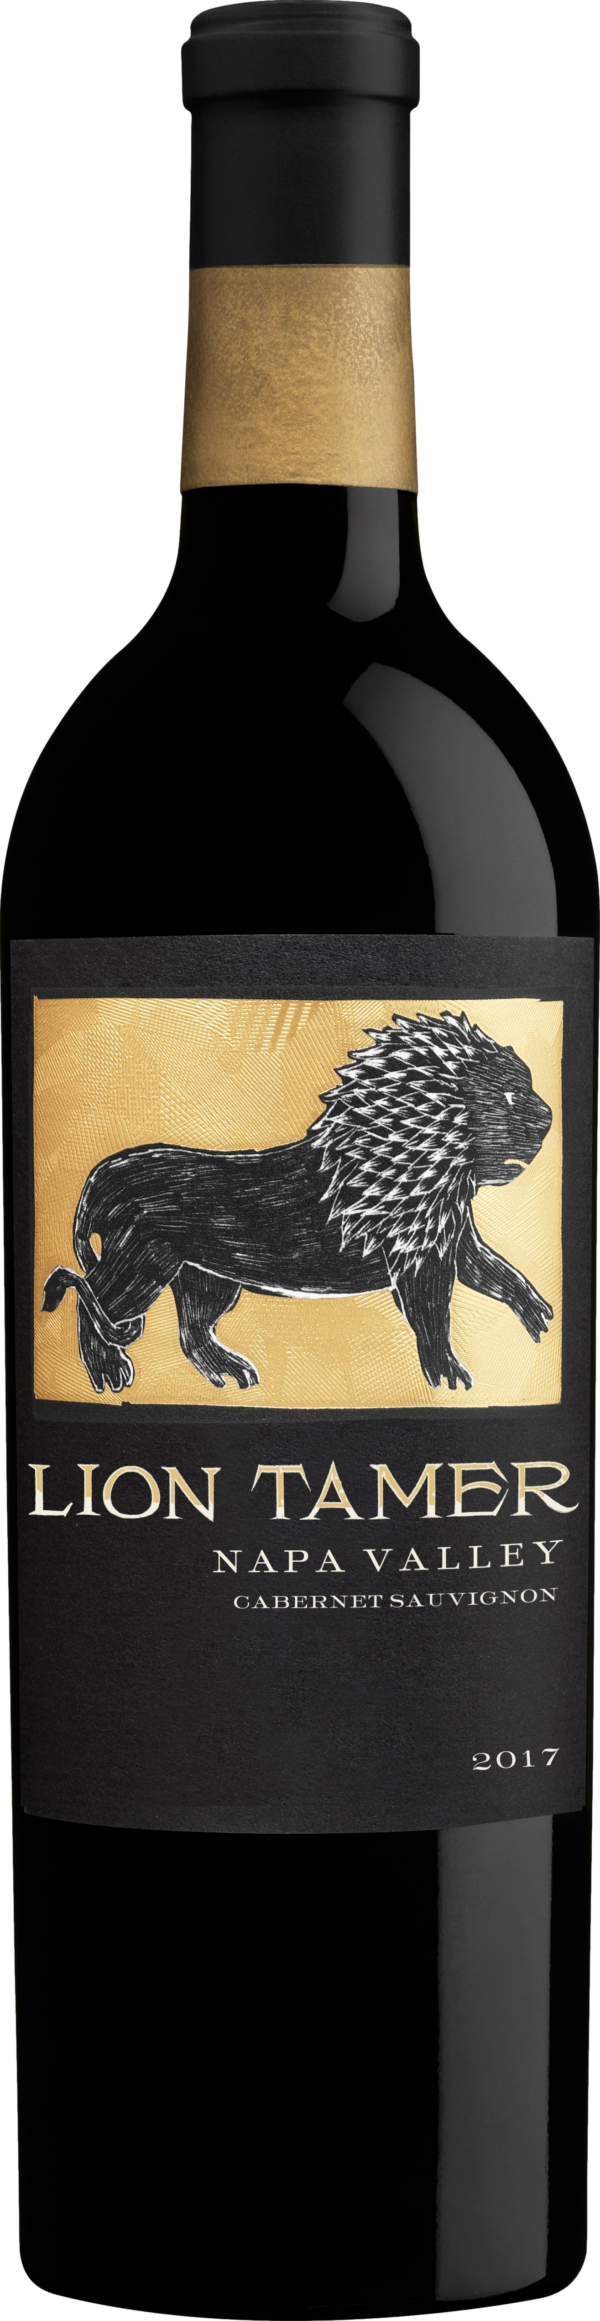 Product image of Hess Lion Tamer Cabernet Sauvignon 2017 from 8wines